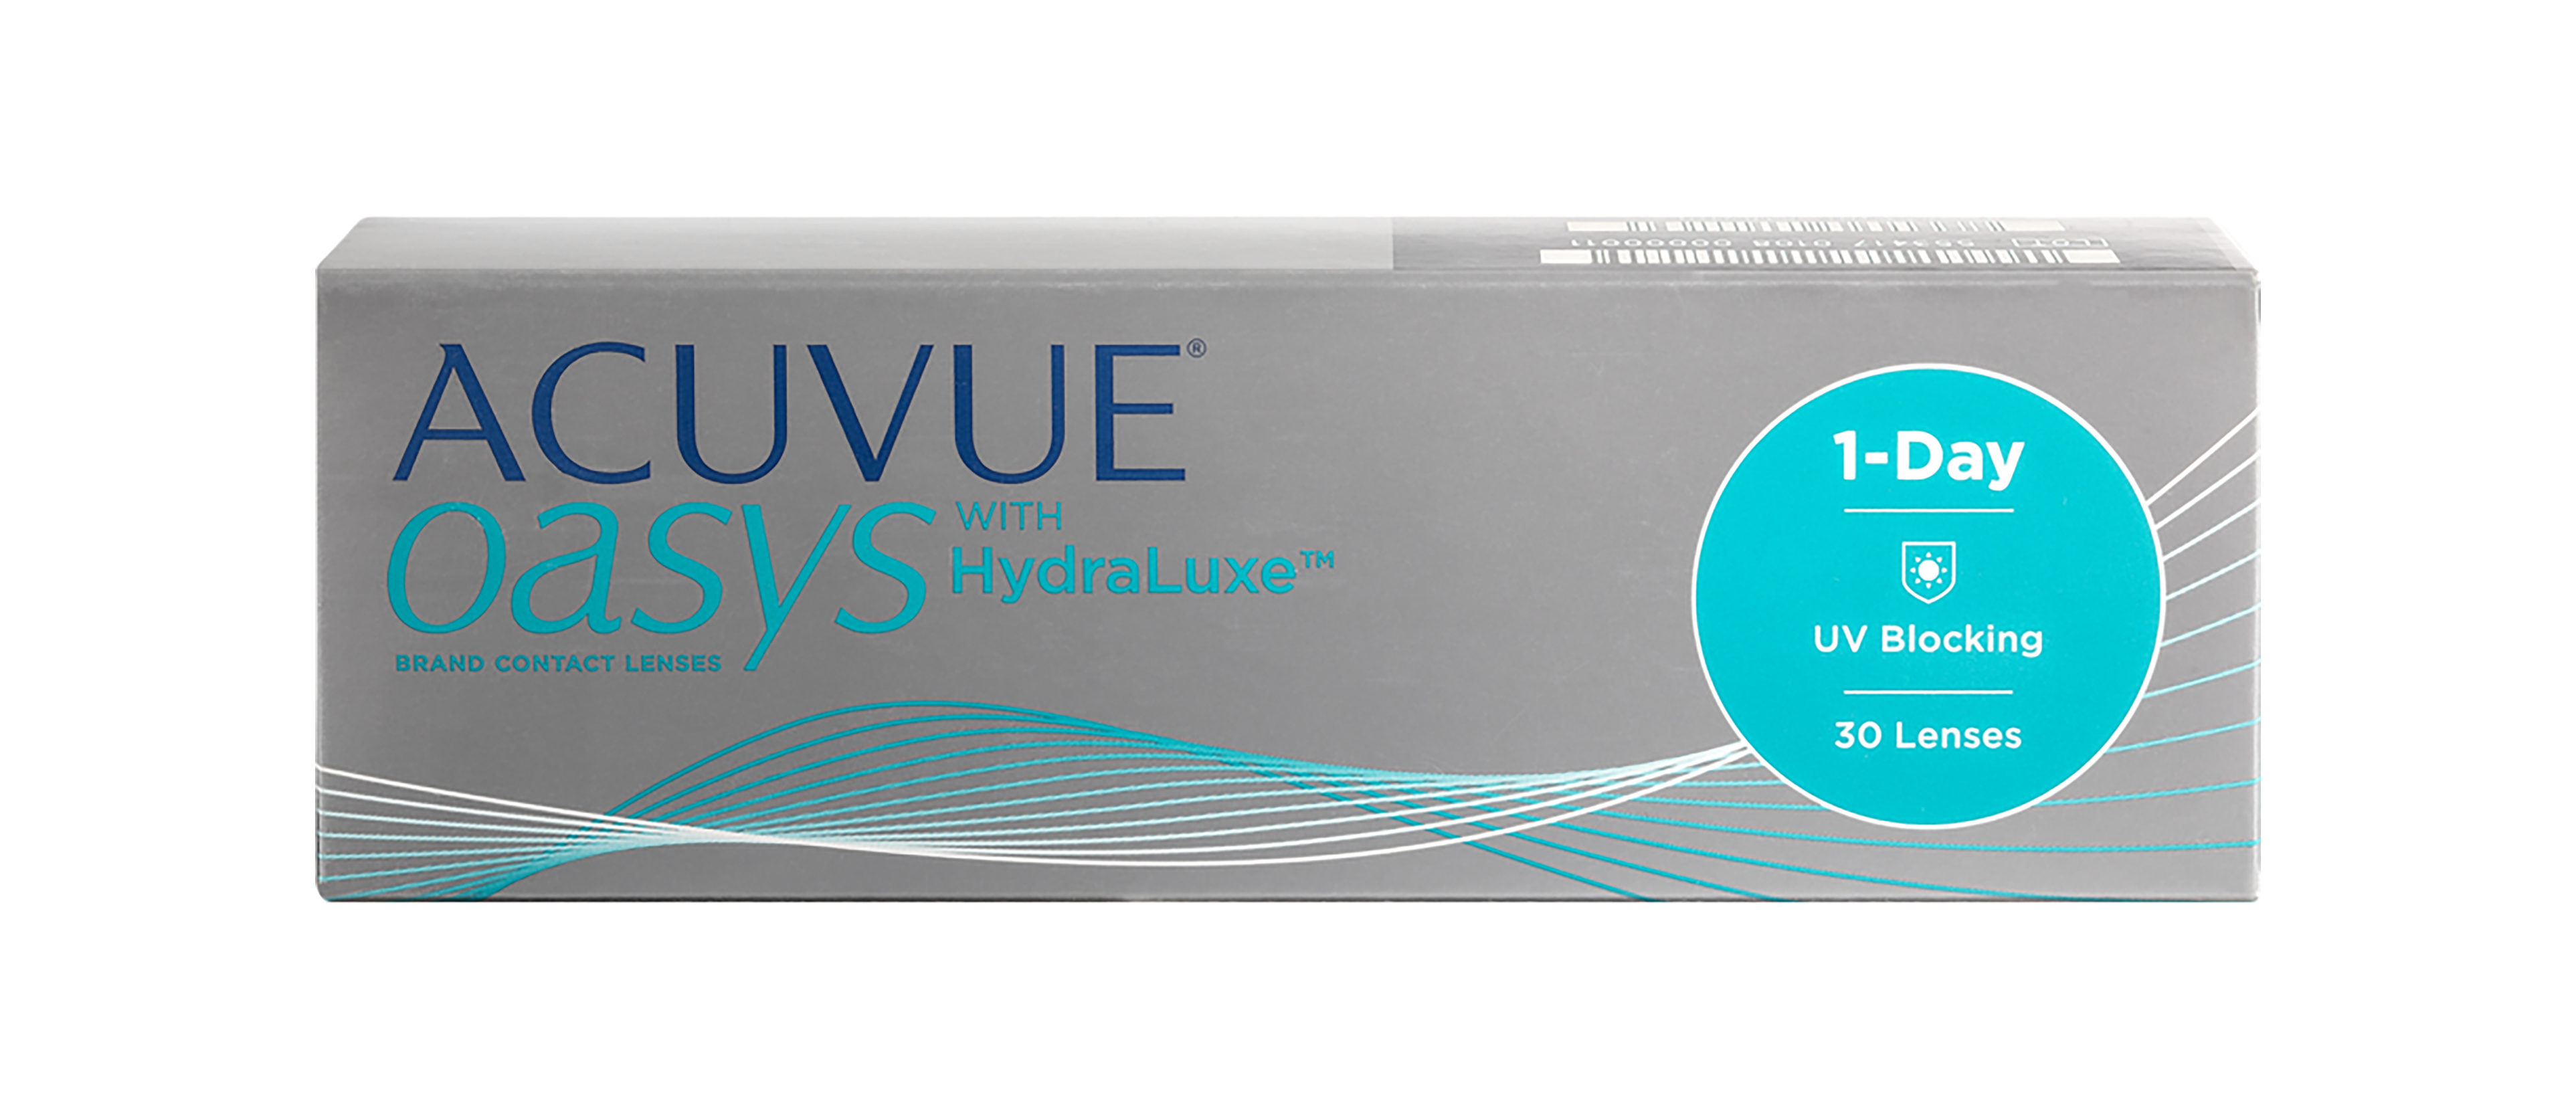 Front 1-Day Acuvue Oasys 30 unidades